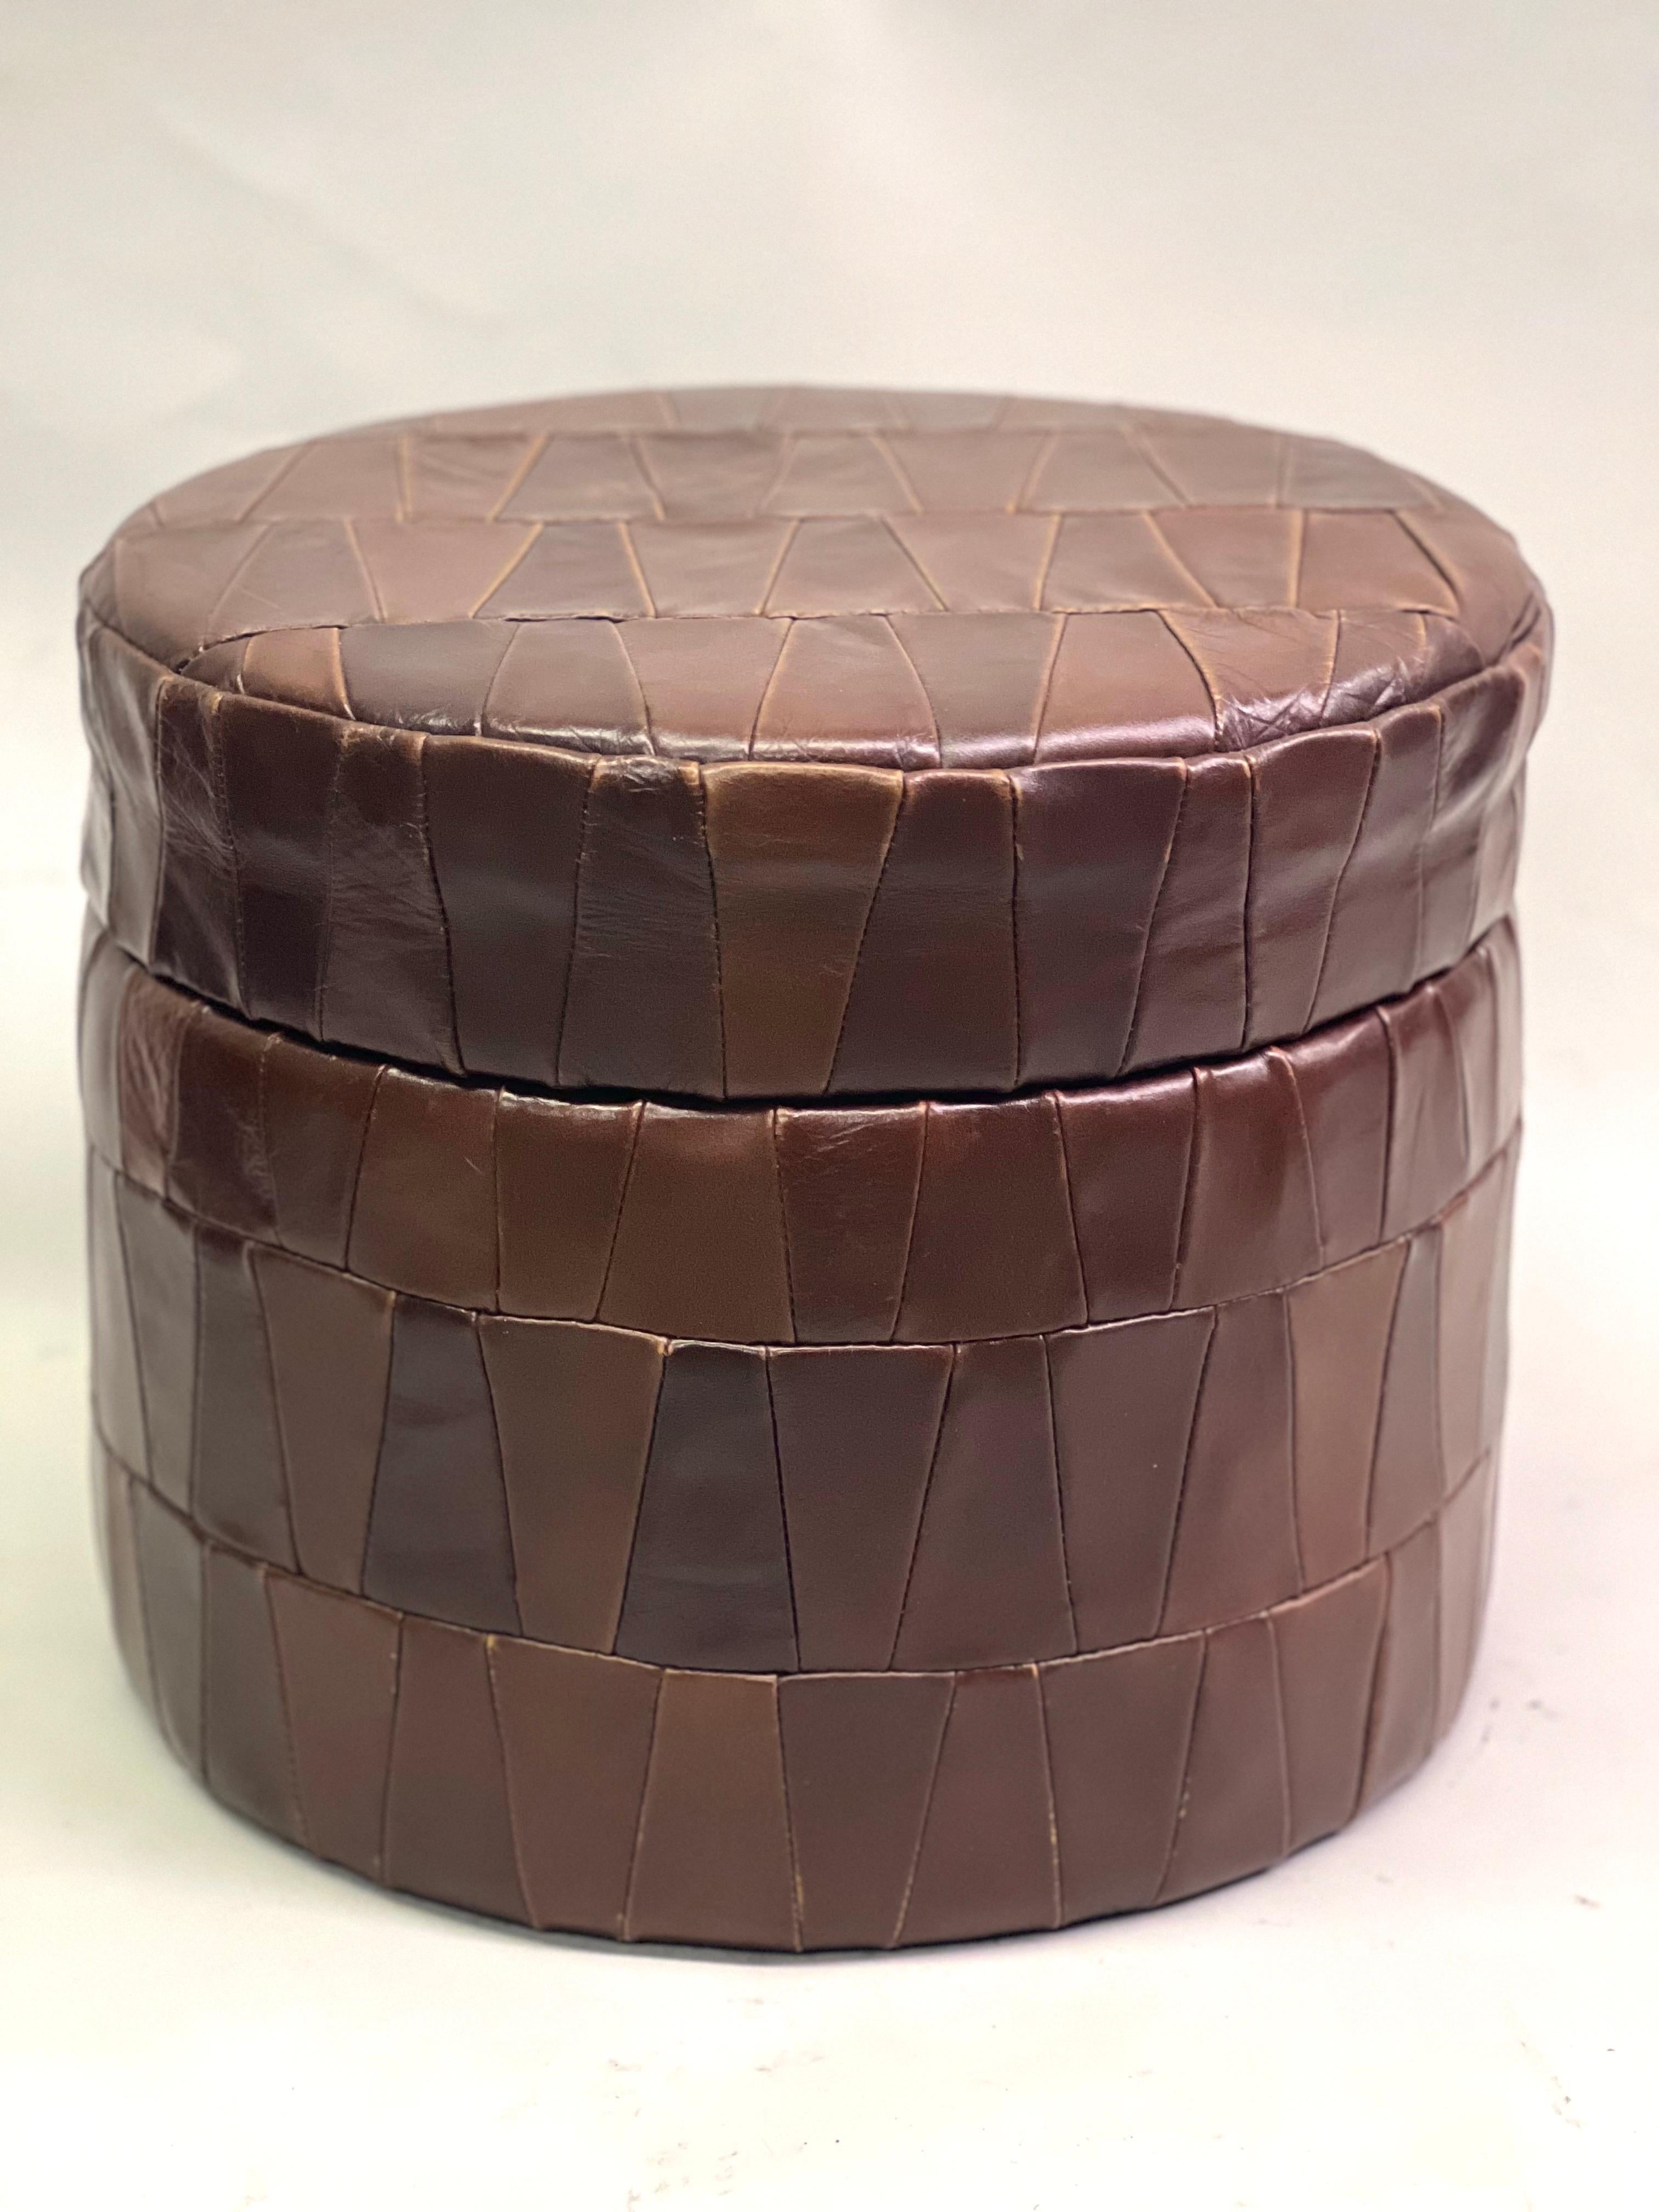 Pair of Swiss Modern Patchwork Leather Storage Ottomans/ Stools by De Sede, 1960 For Sale 4